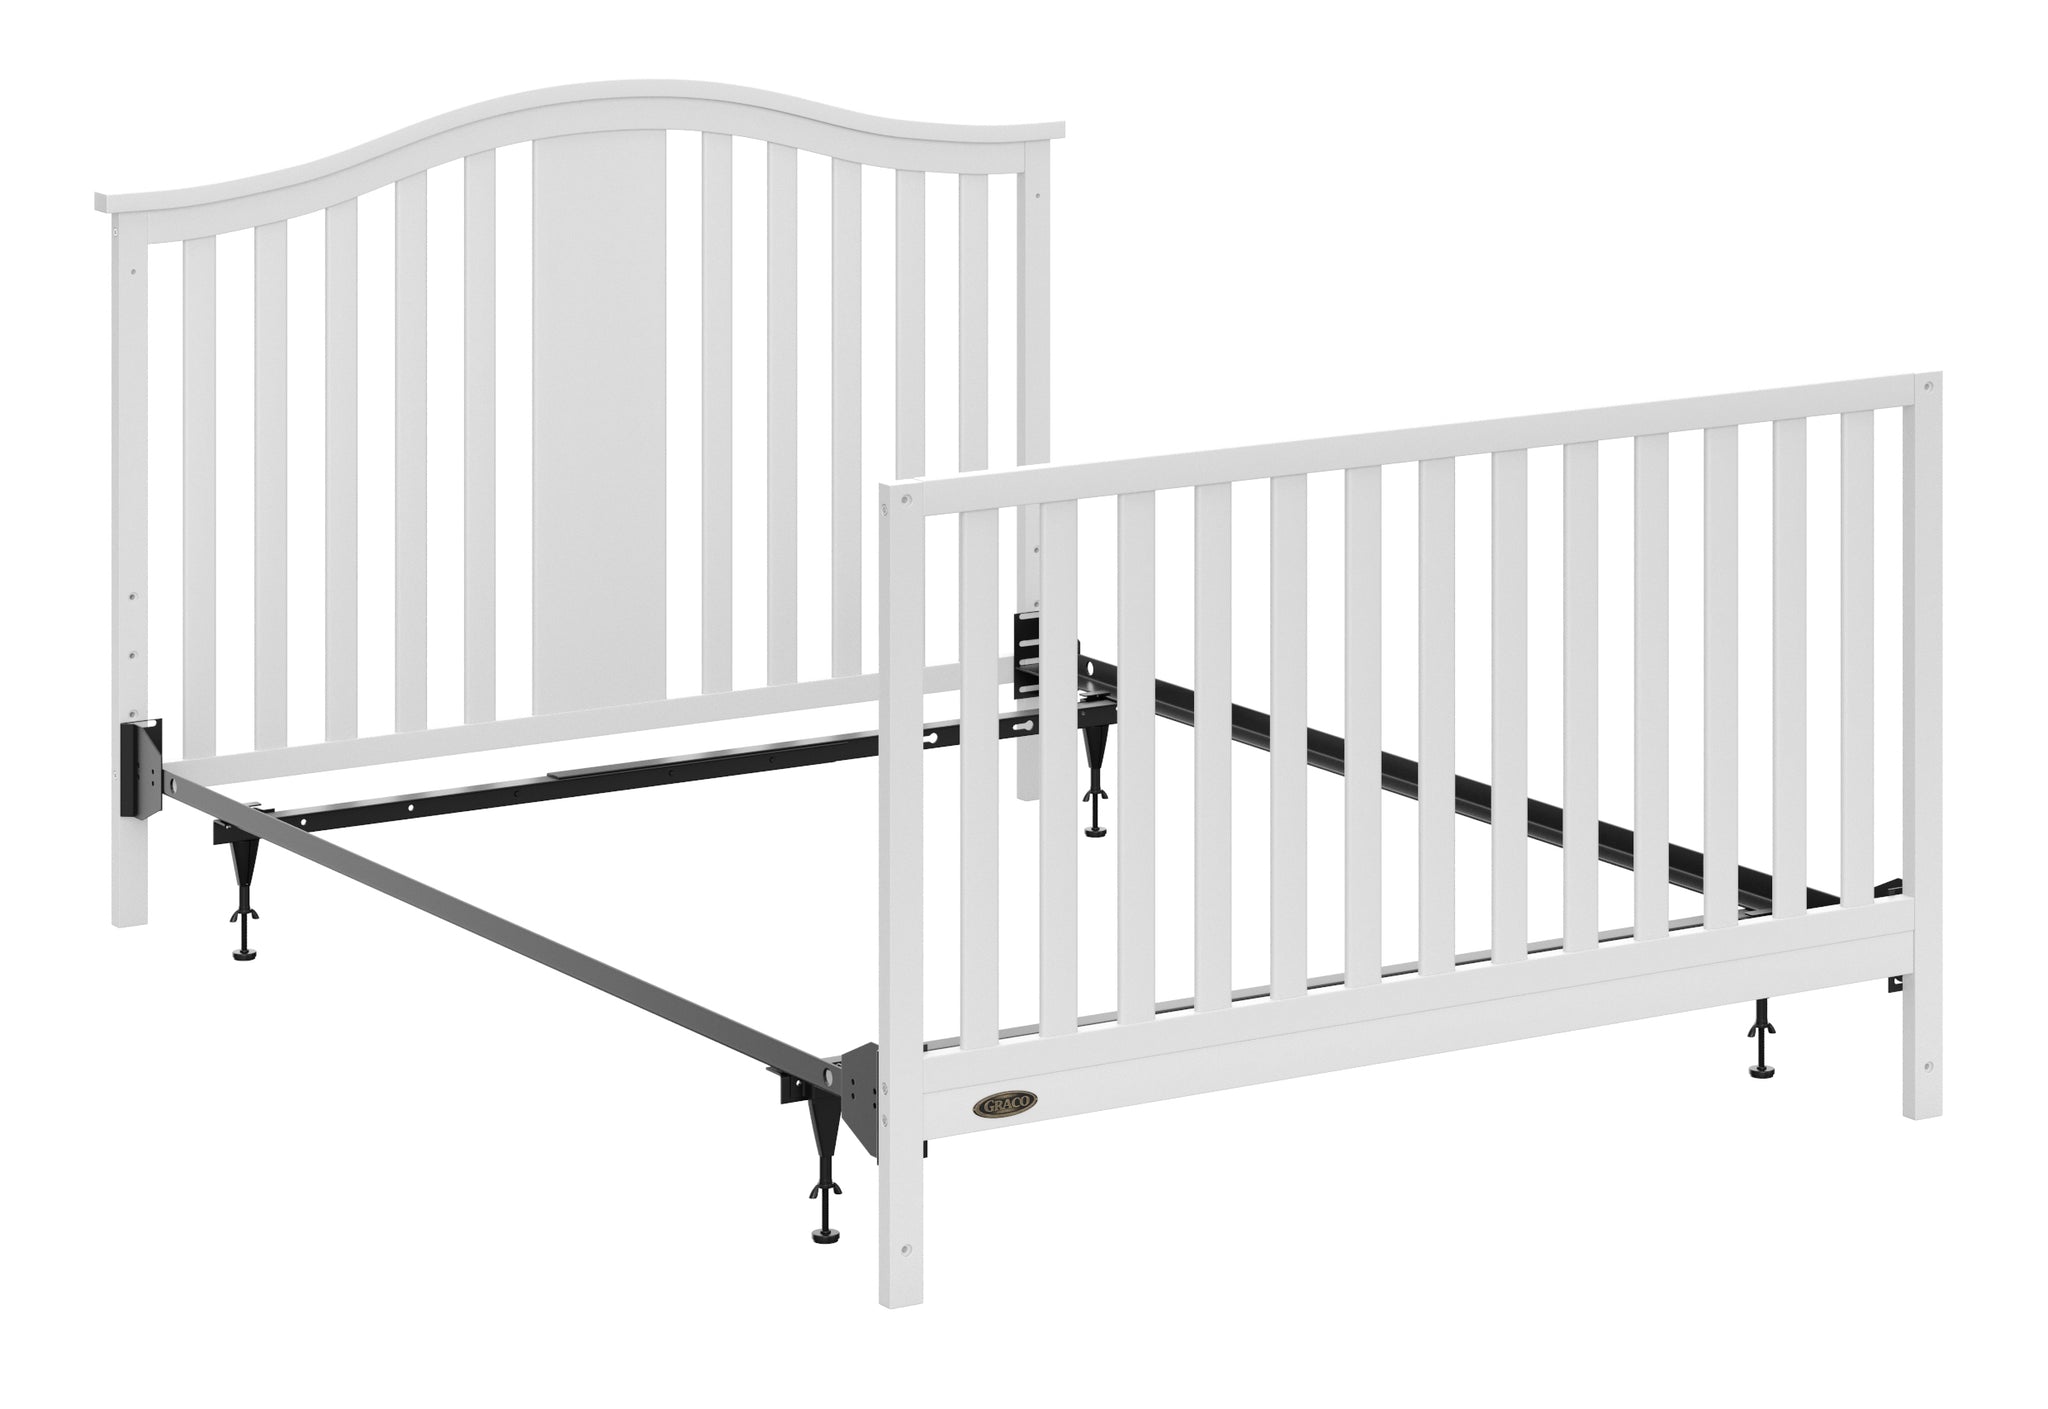 angled full-size bed metal conversion kit applied in full-size bed